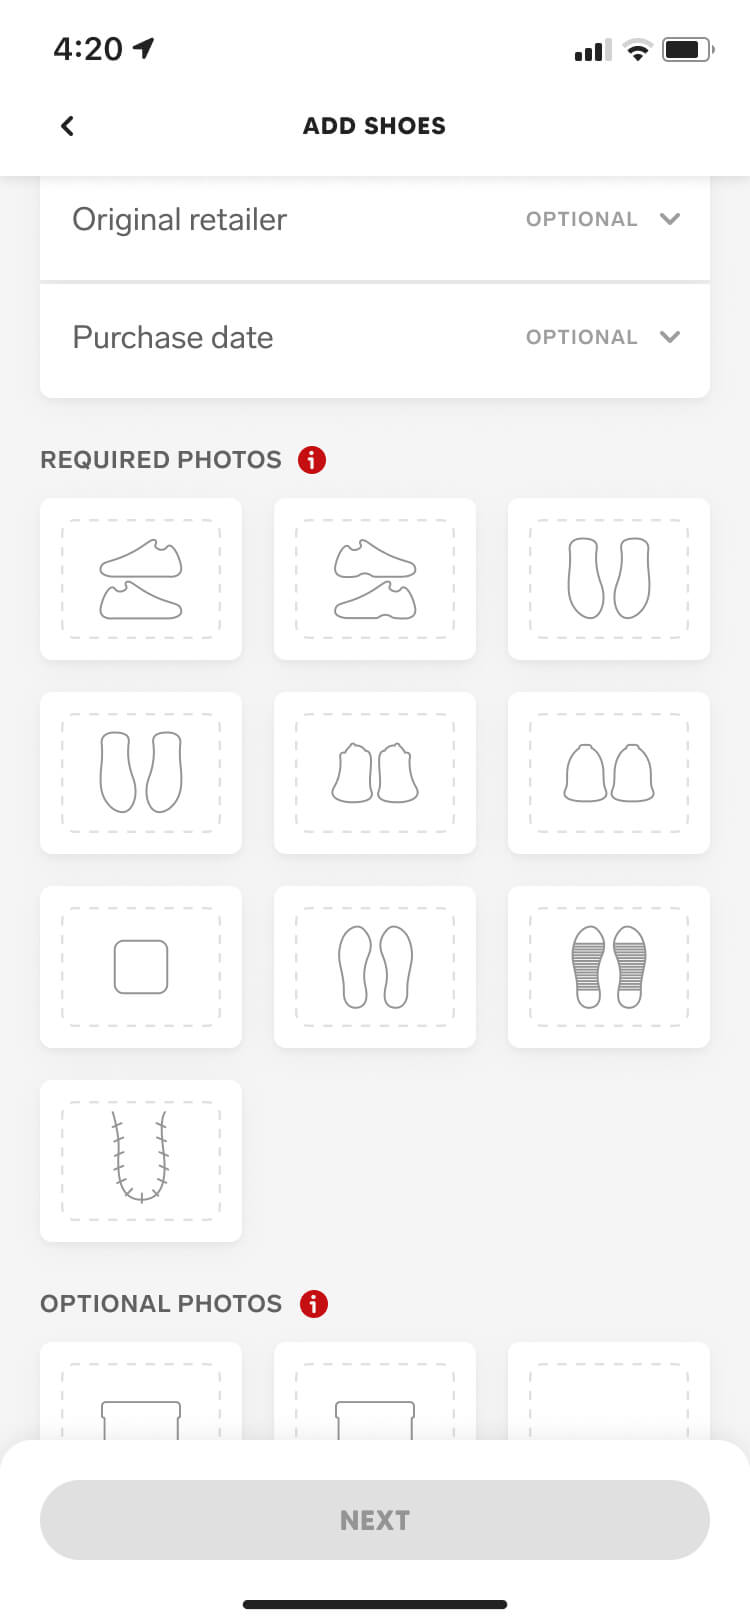 Add shoes scrolled screenshot of the Collect mobile app